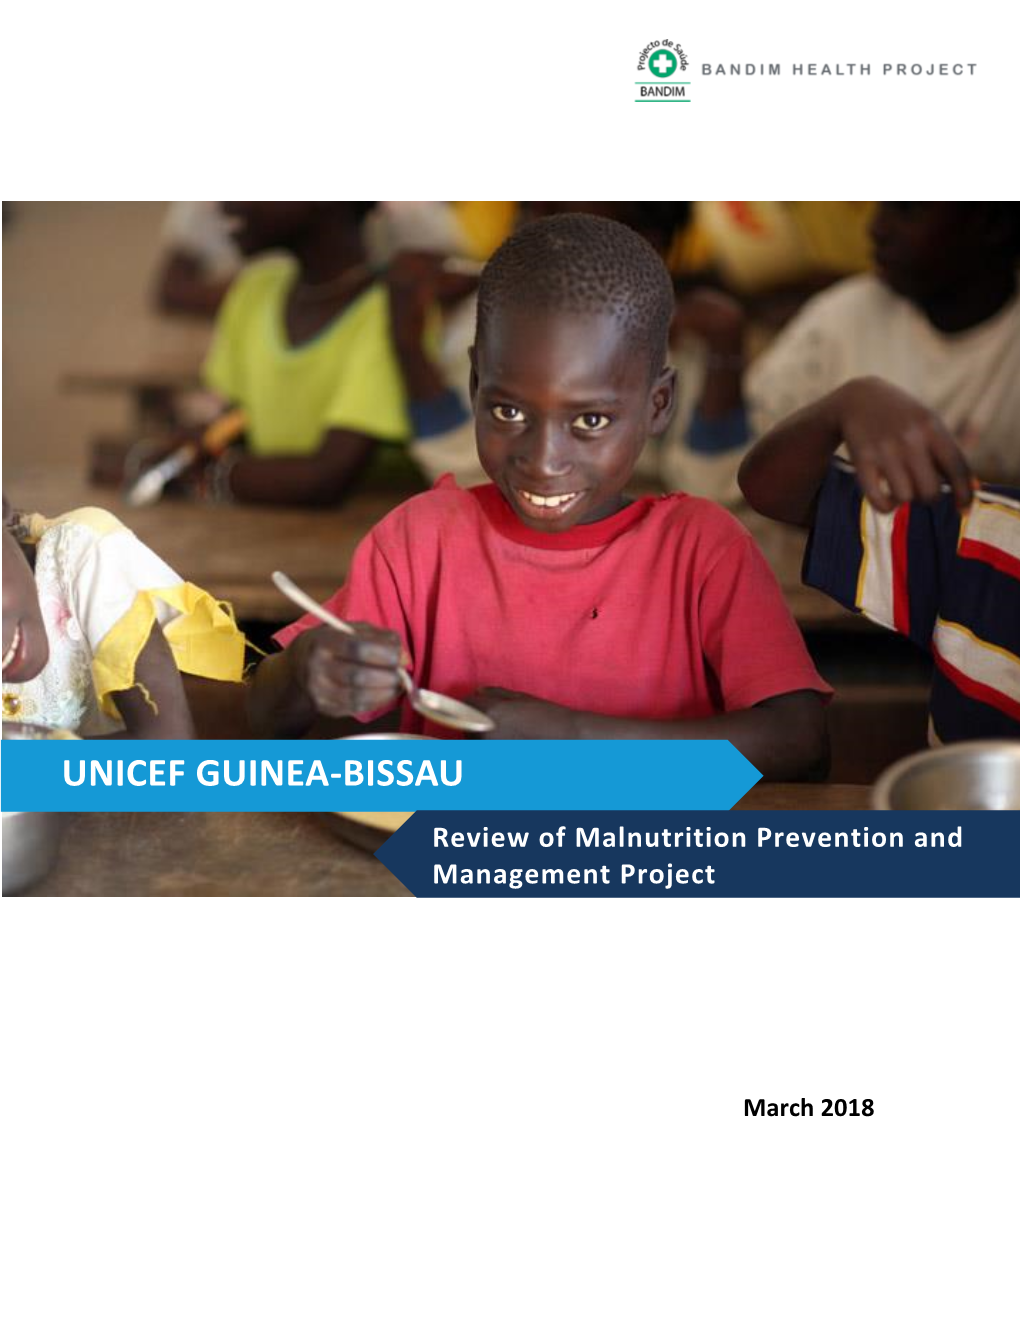 UNICEF GUINEA-BISSAU Review of Malnutrition Prevention and Management Project